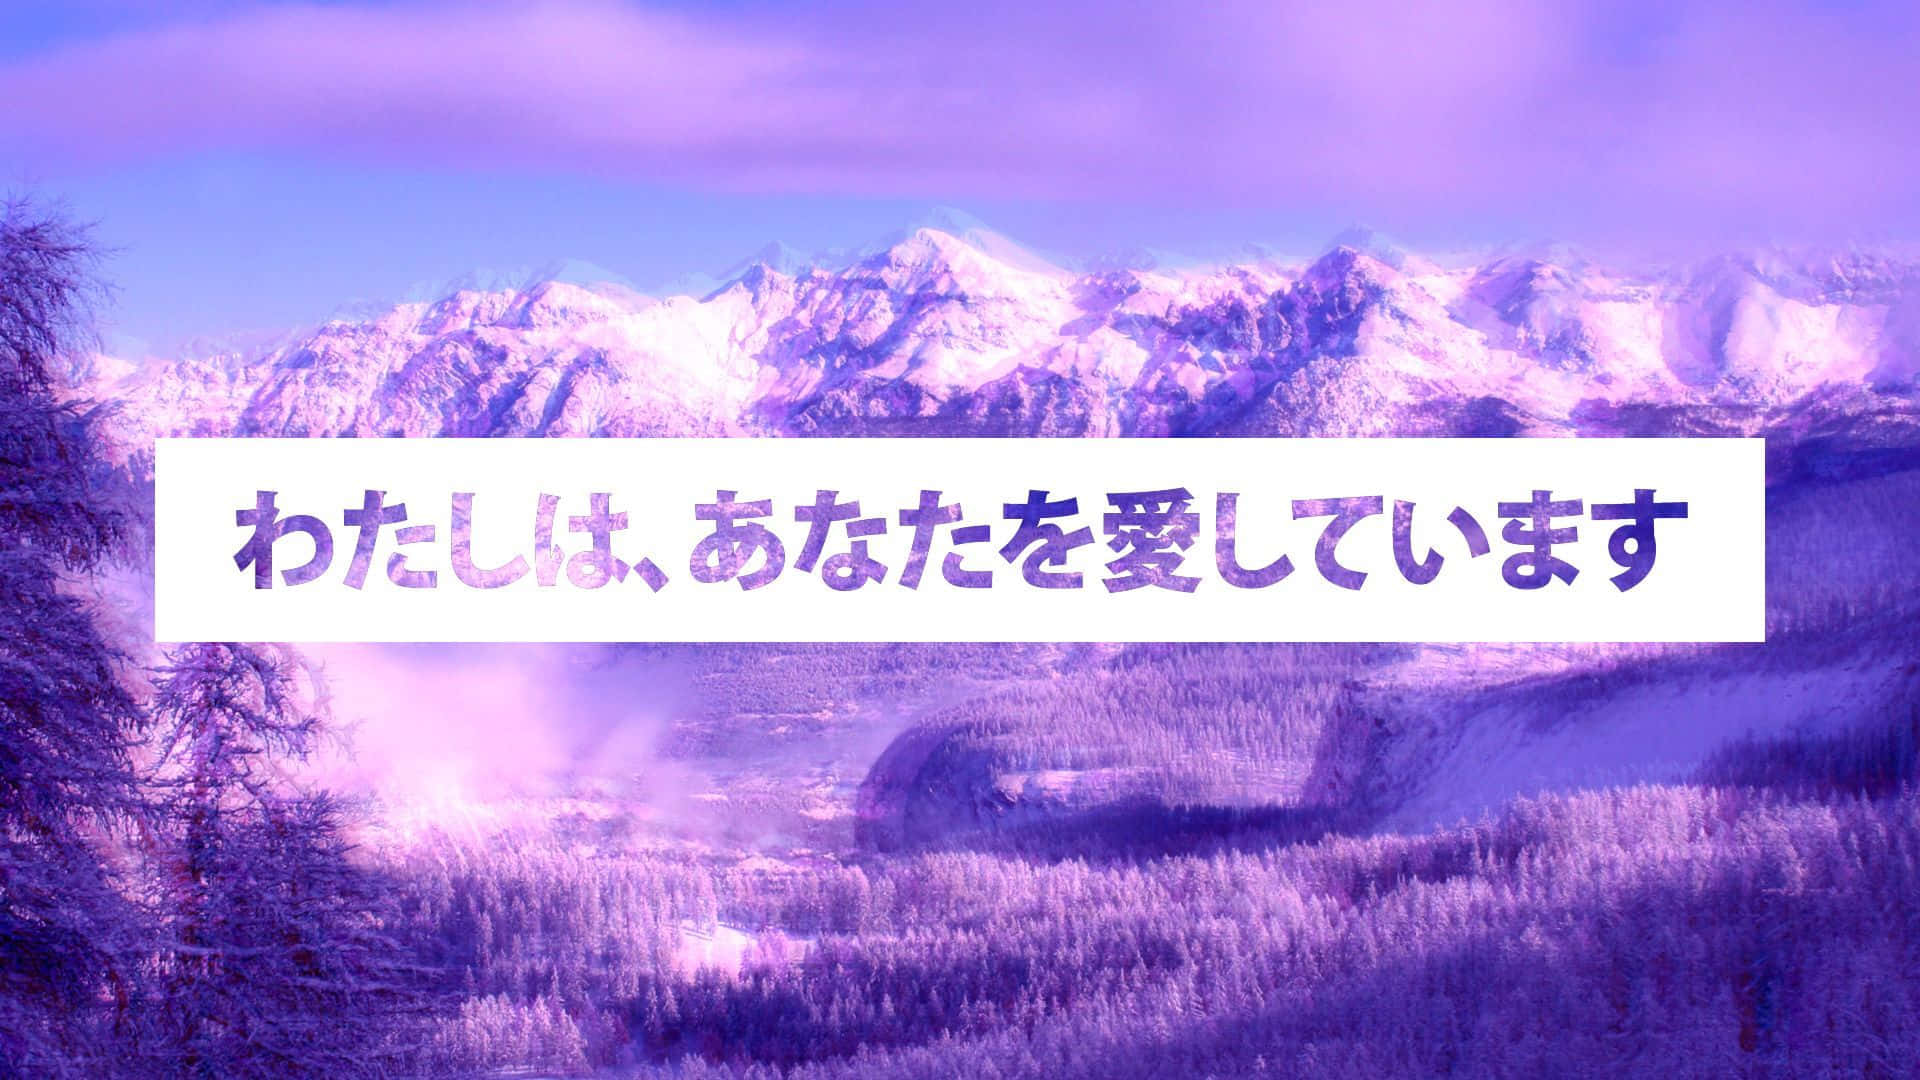 A Purple Background With Snowy Mountains And A Japanese Text Wallpaper